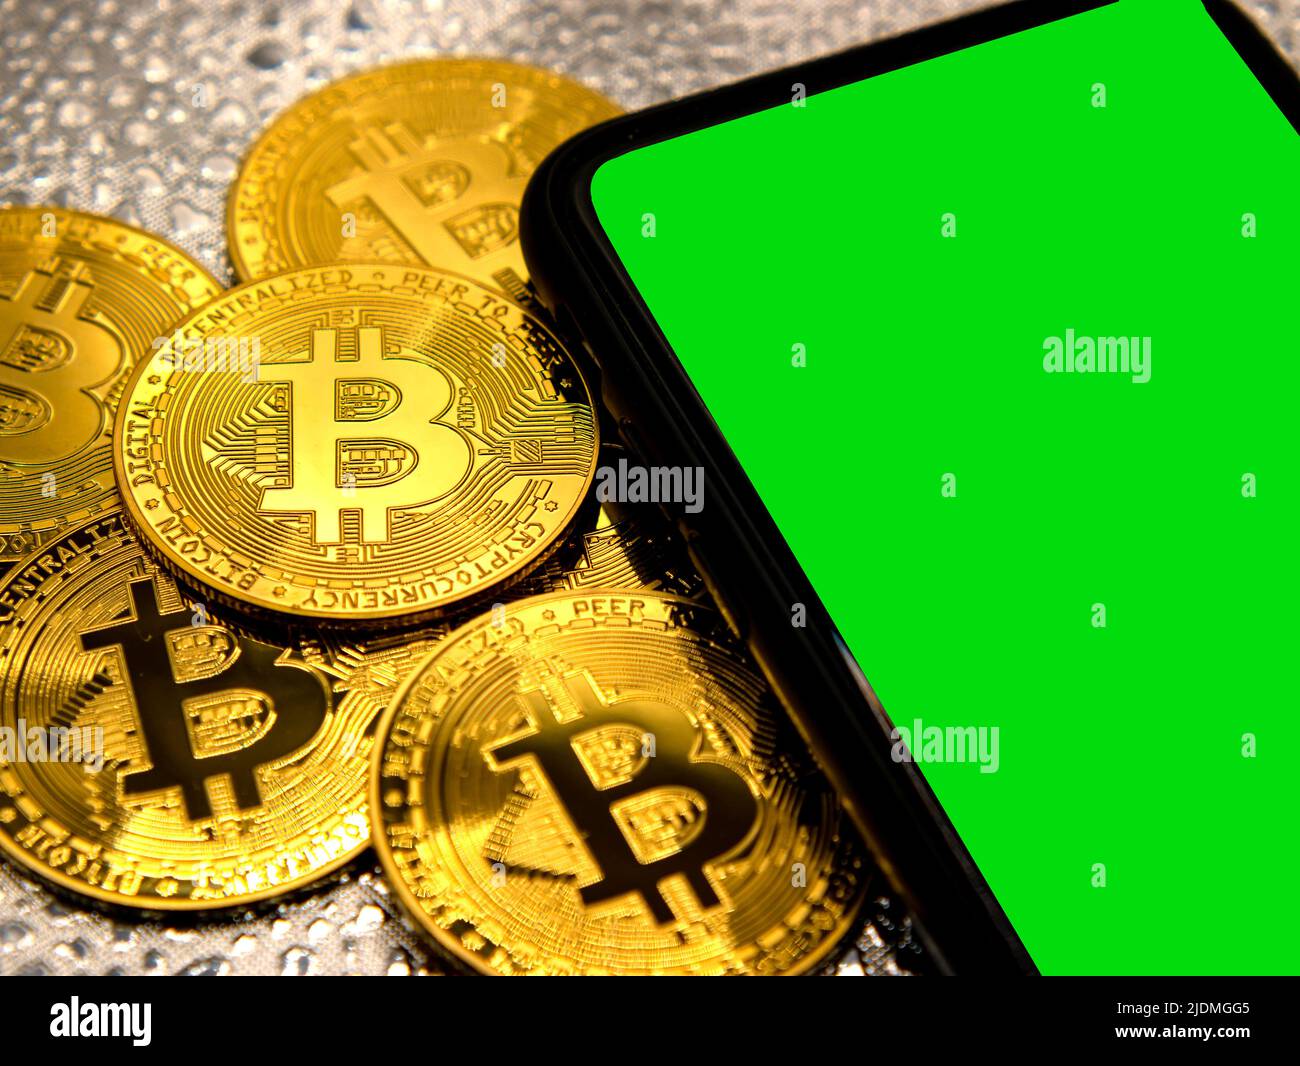 Bitcoin coins in golden metal with a smarthphone beside it, green screen area copy space Stock Photo